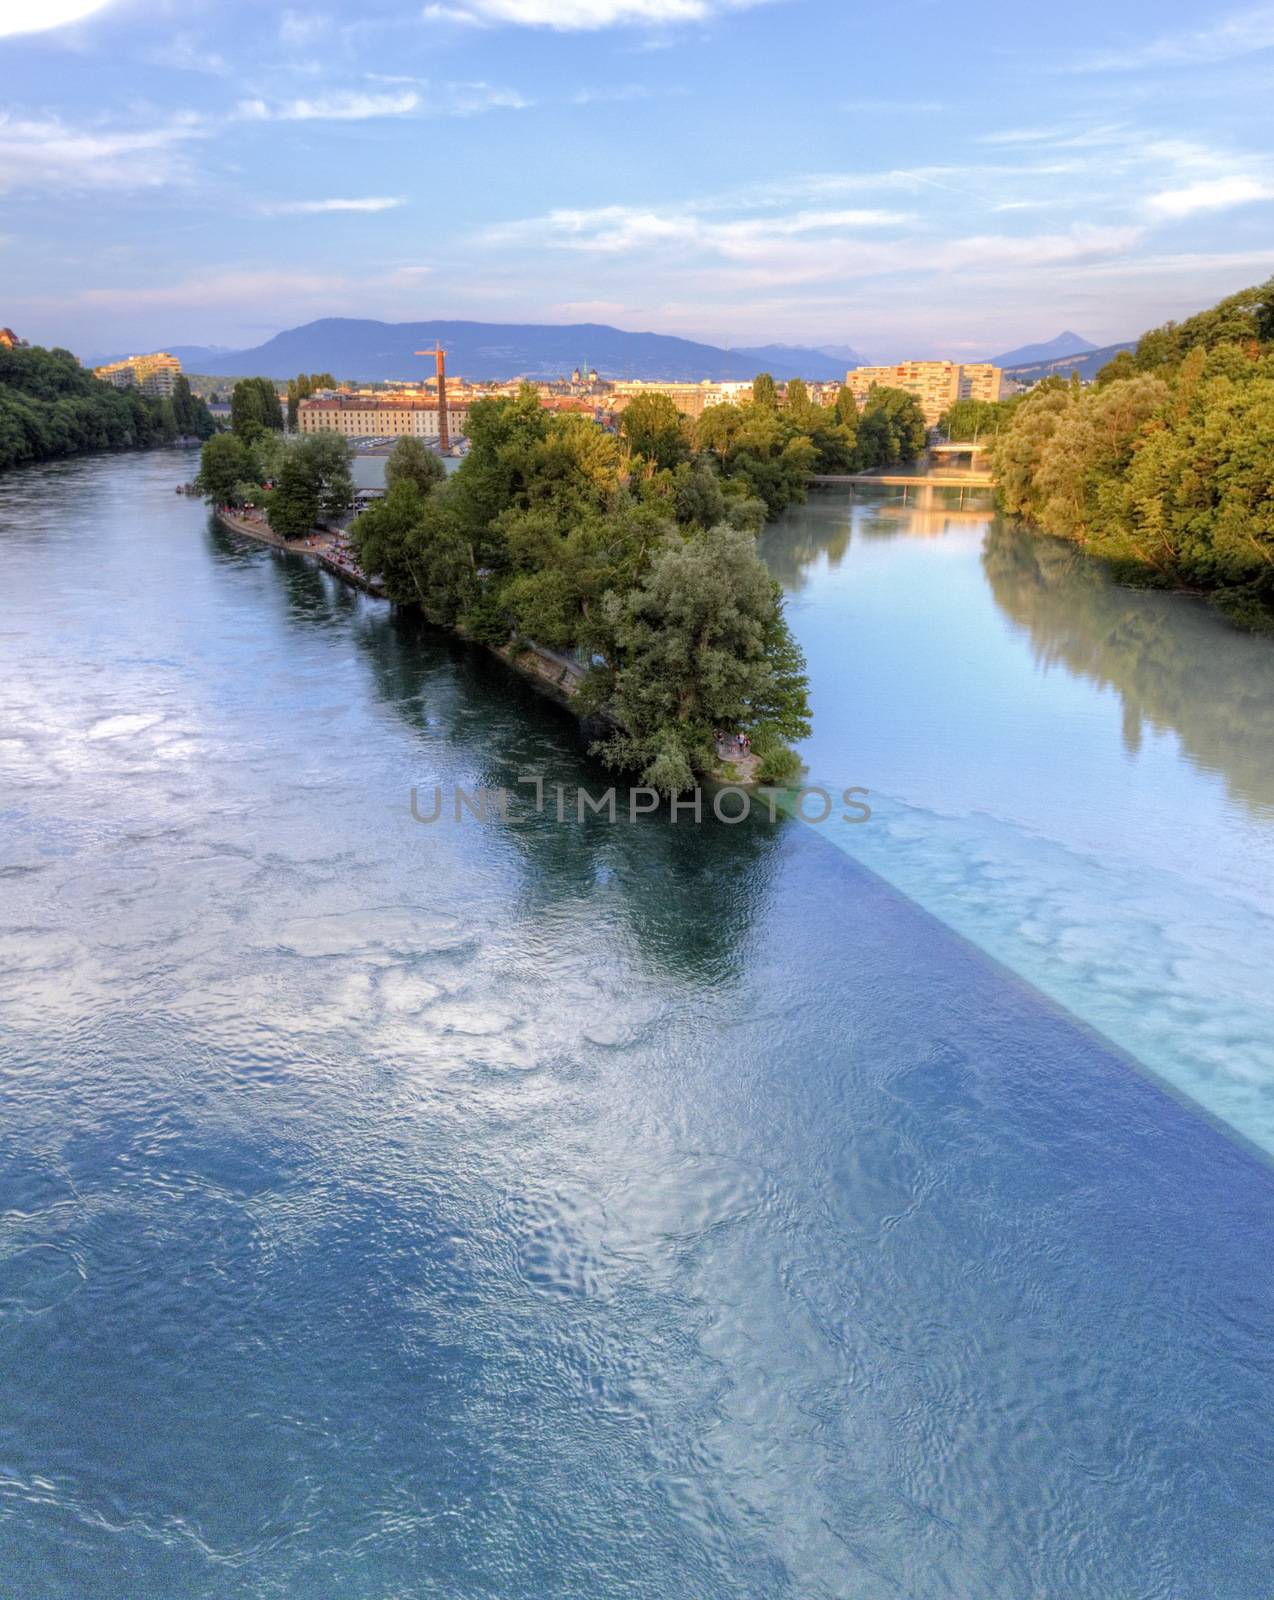 Rhone and Arve river confluence, Geneva, Switzerland, HDR by Elenaphotos21